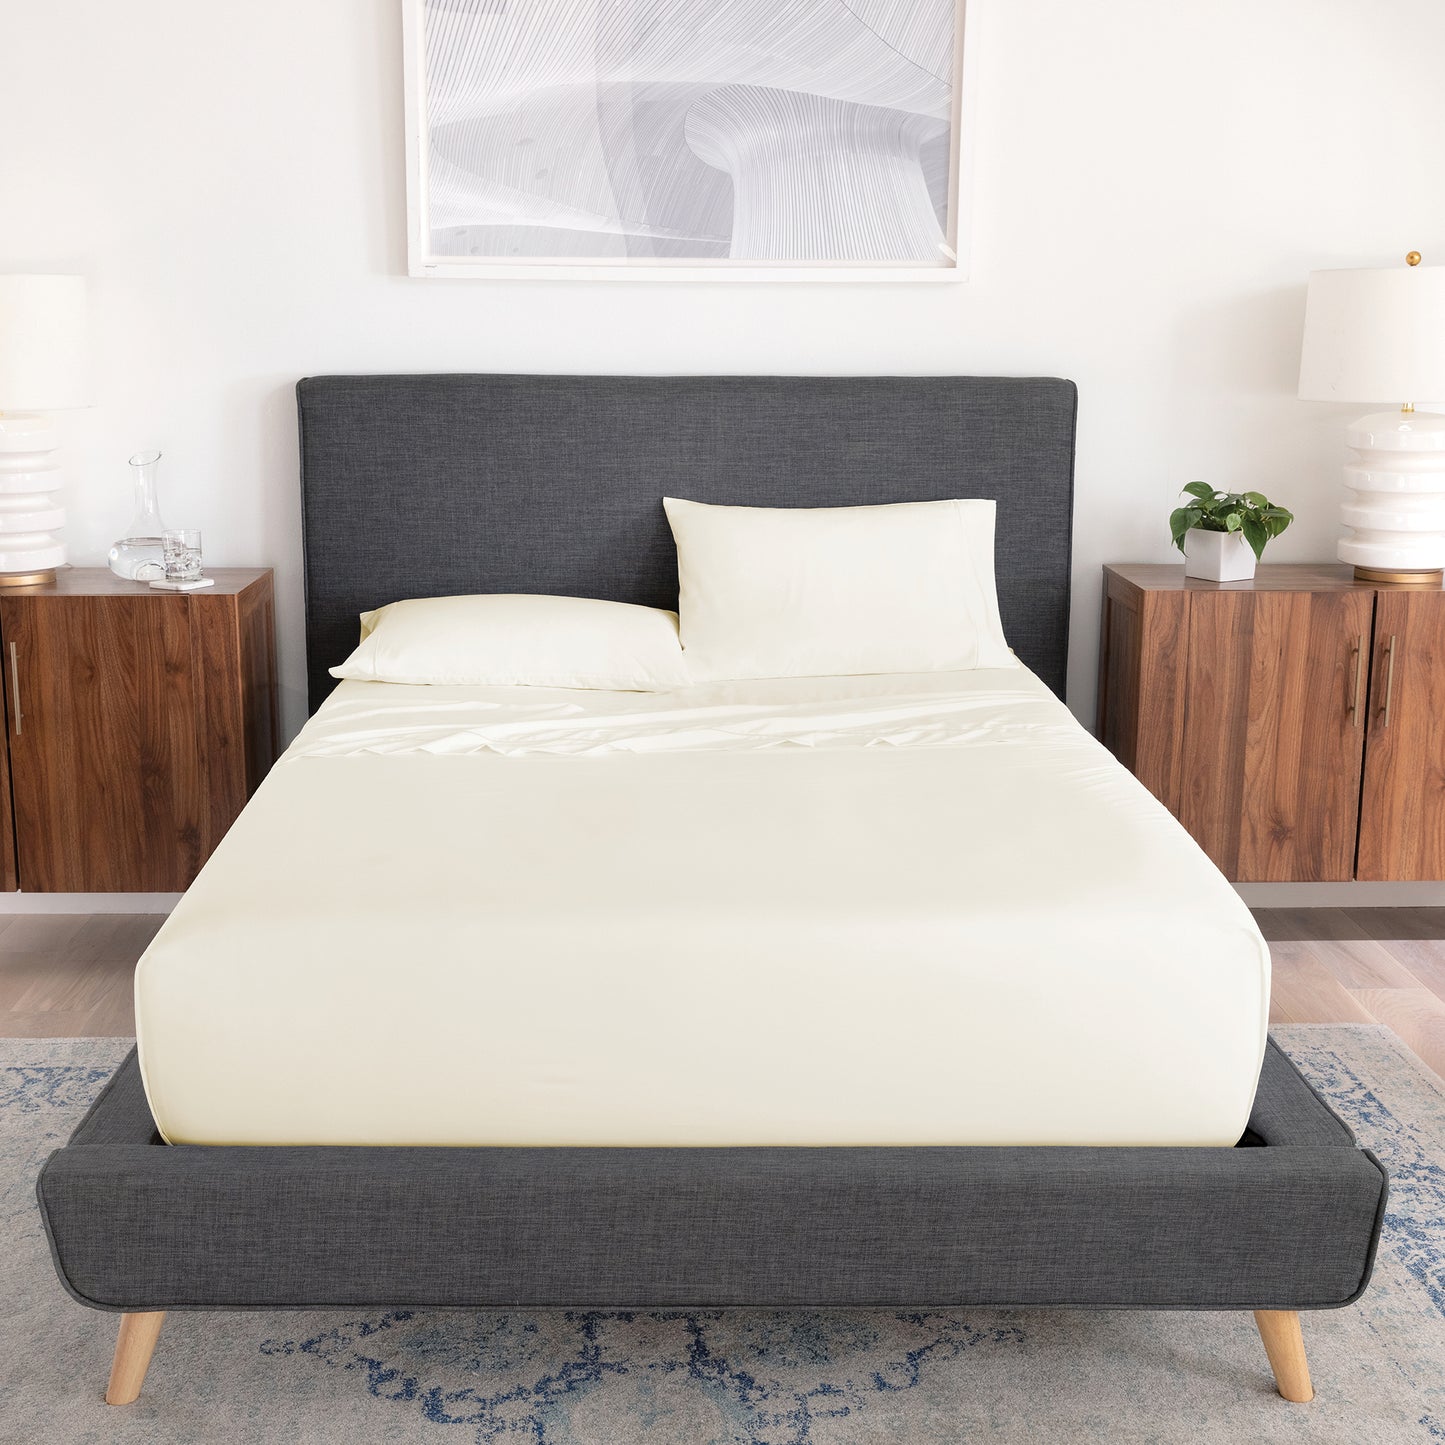 ARCTIC SHEETS IVORY